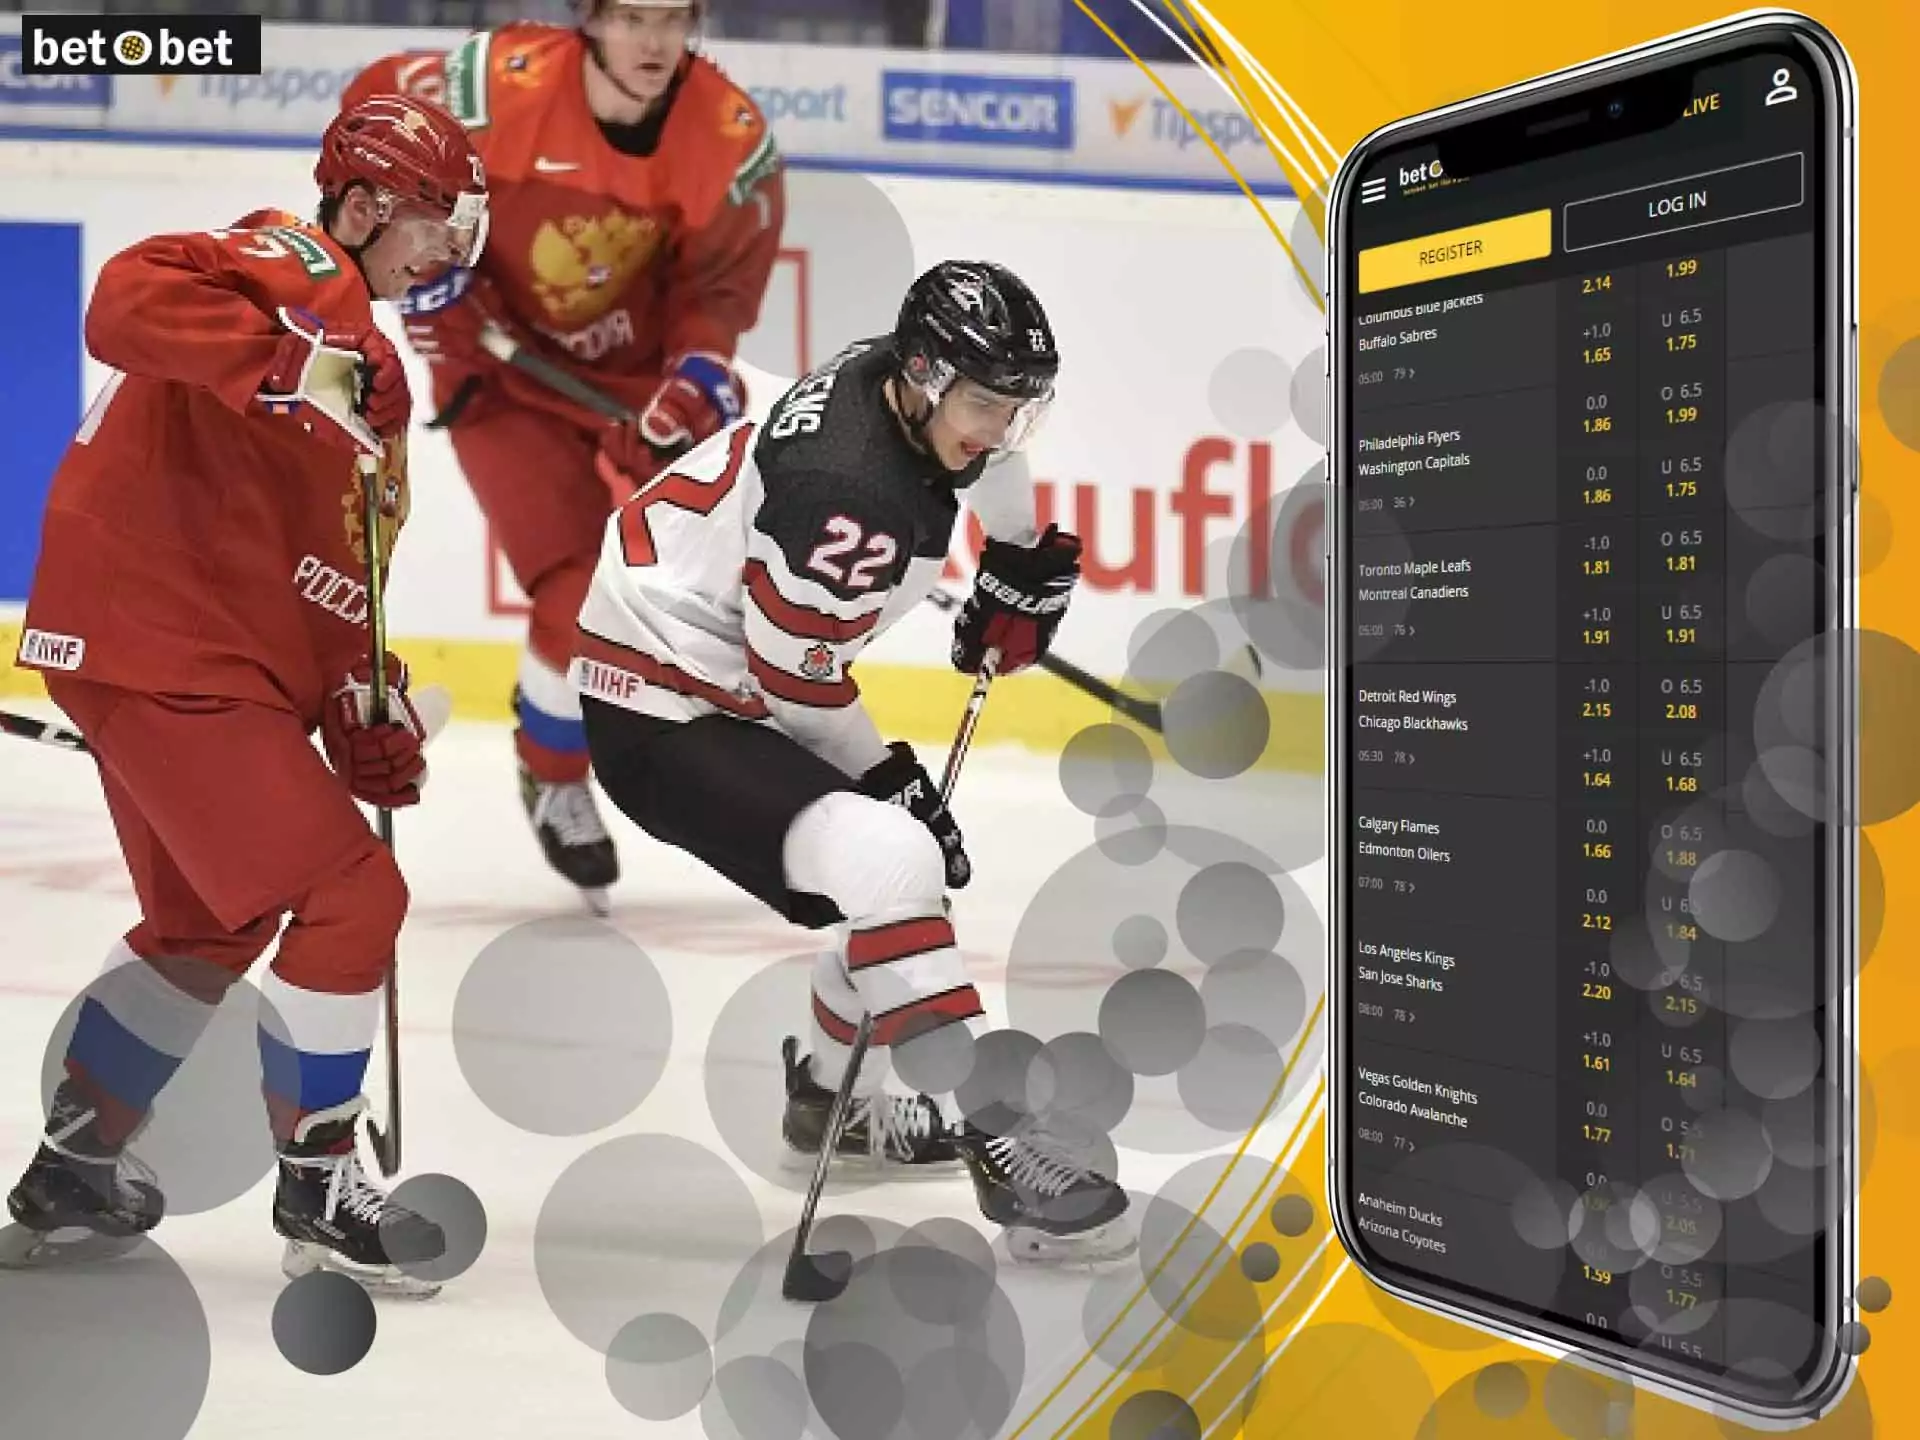 Hockey is among the betting options at BetOBet.